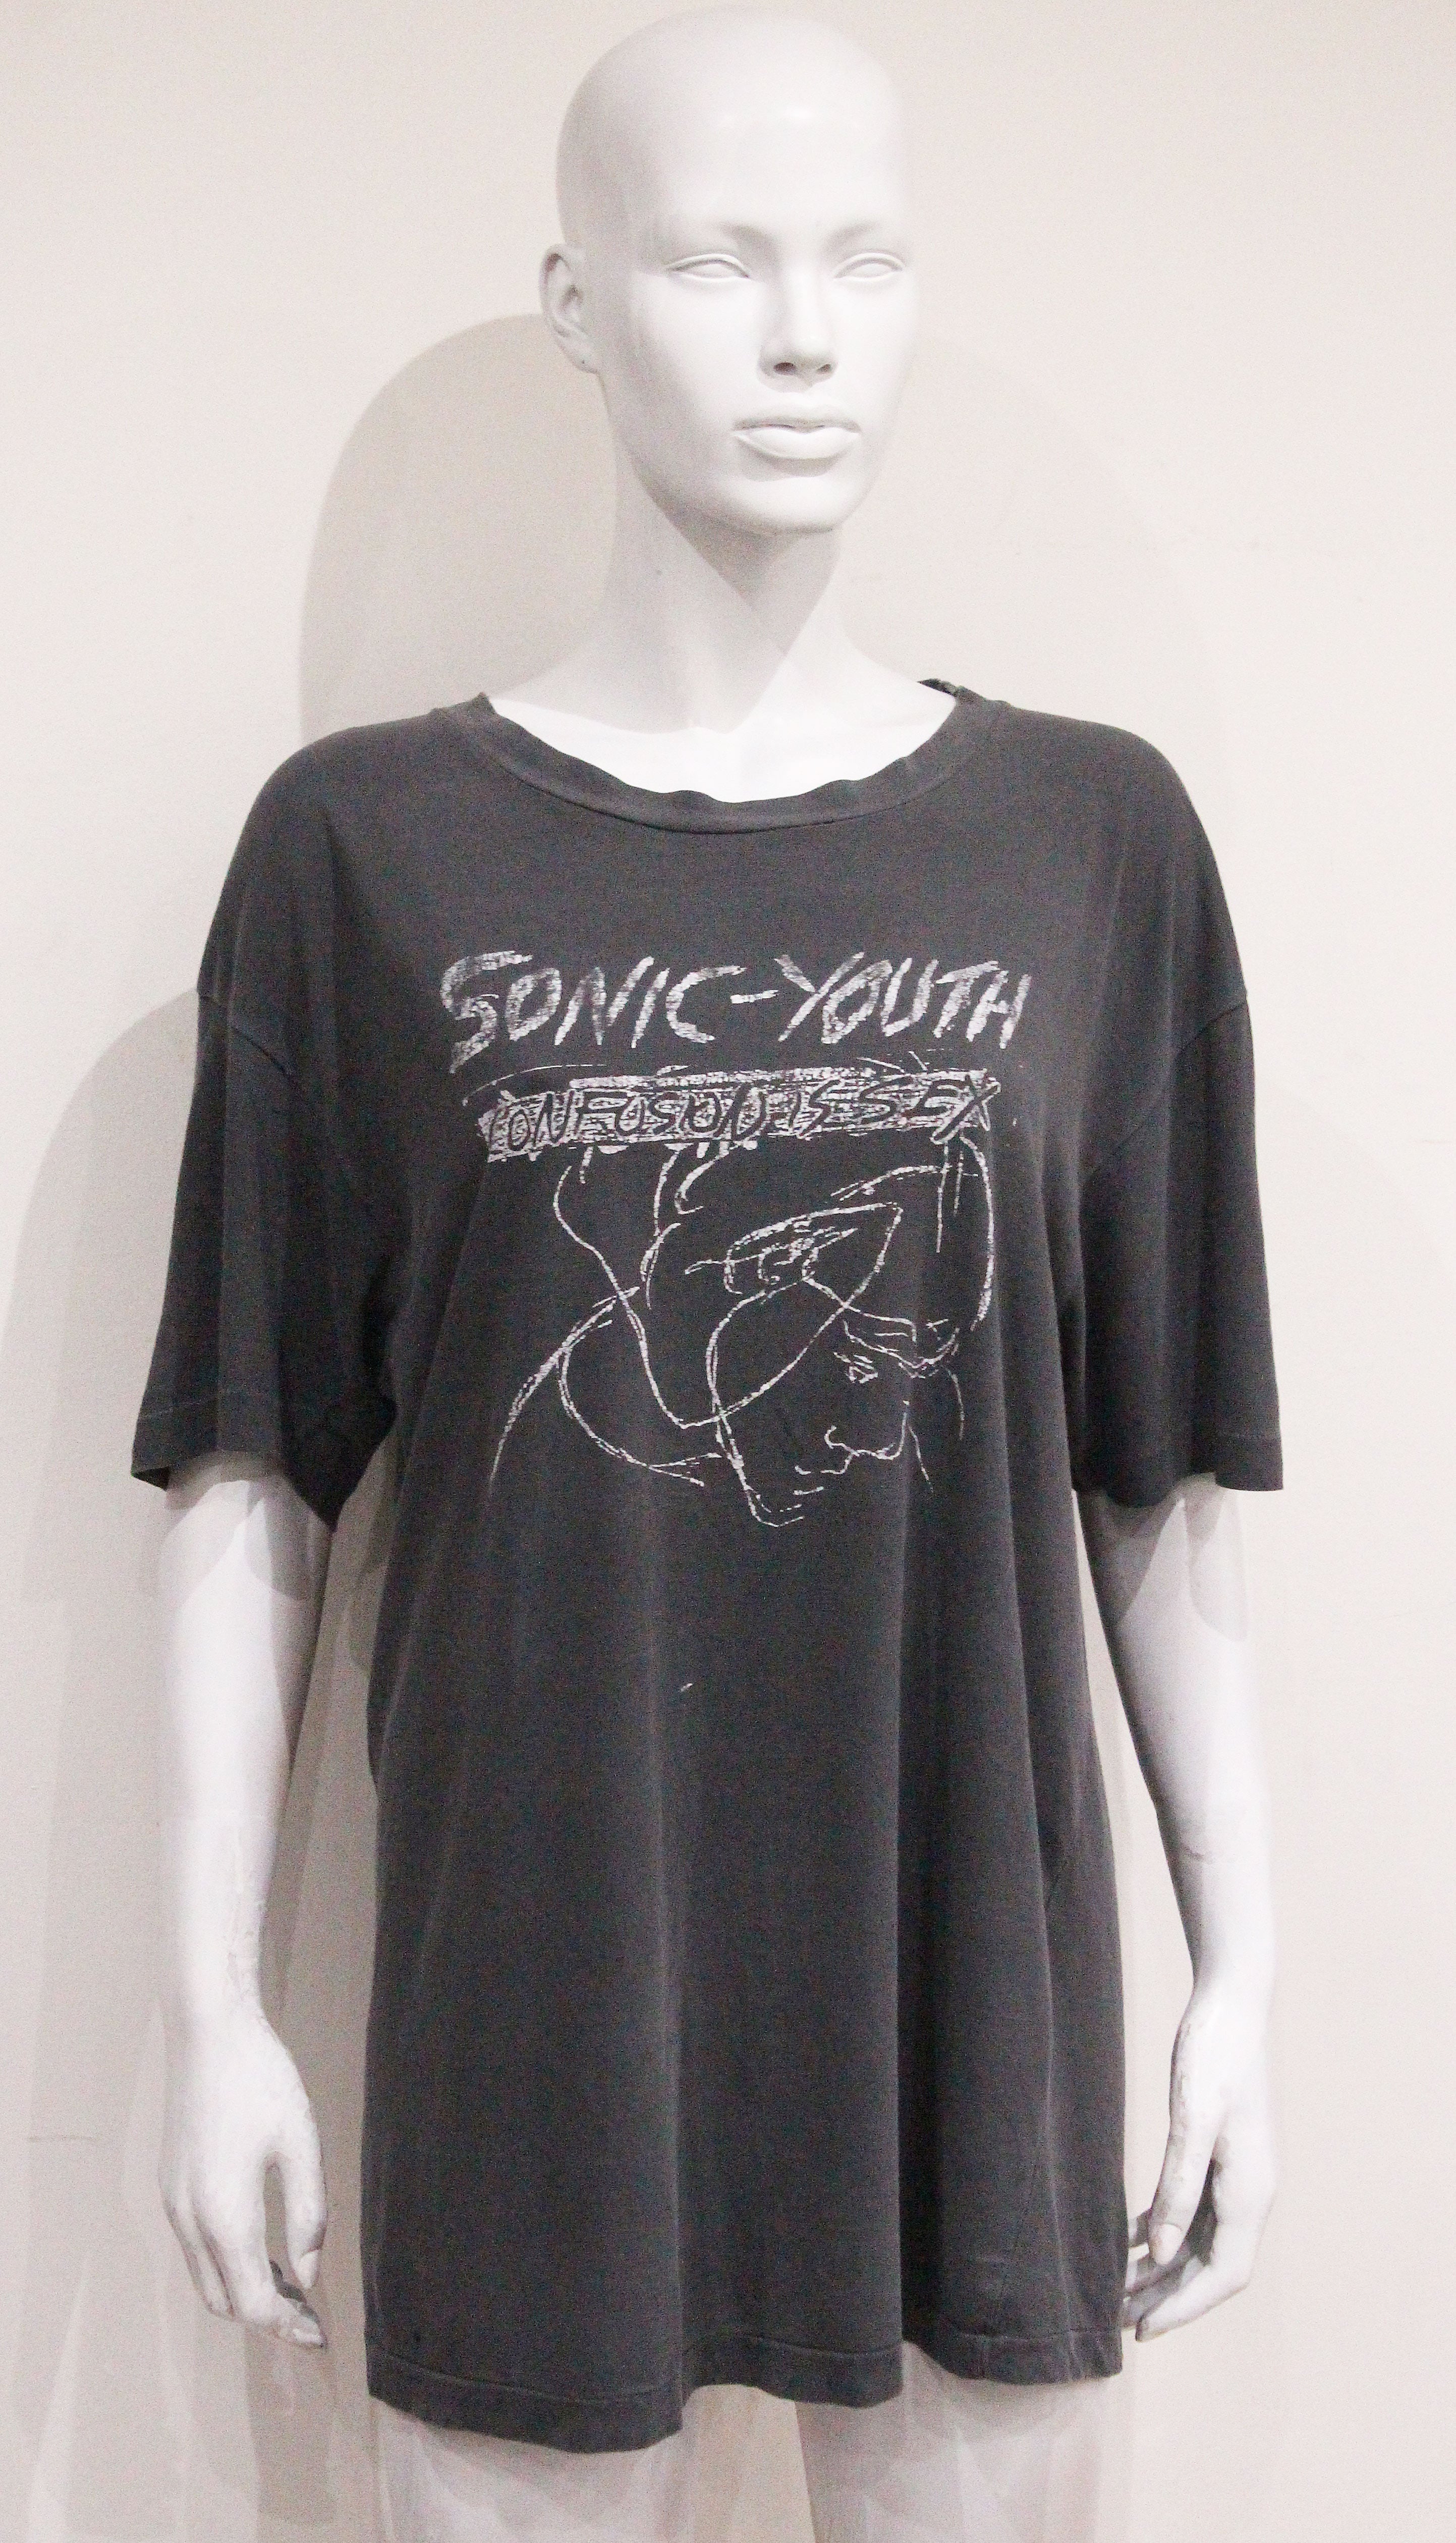 Sonic Youth 'CONFUSION IS SEX' original band tee, c. 1983